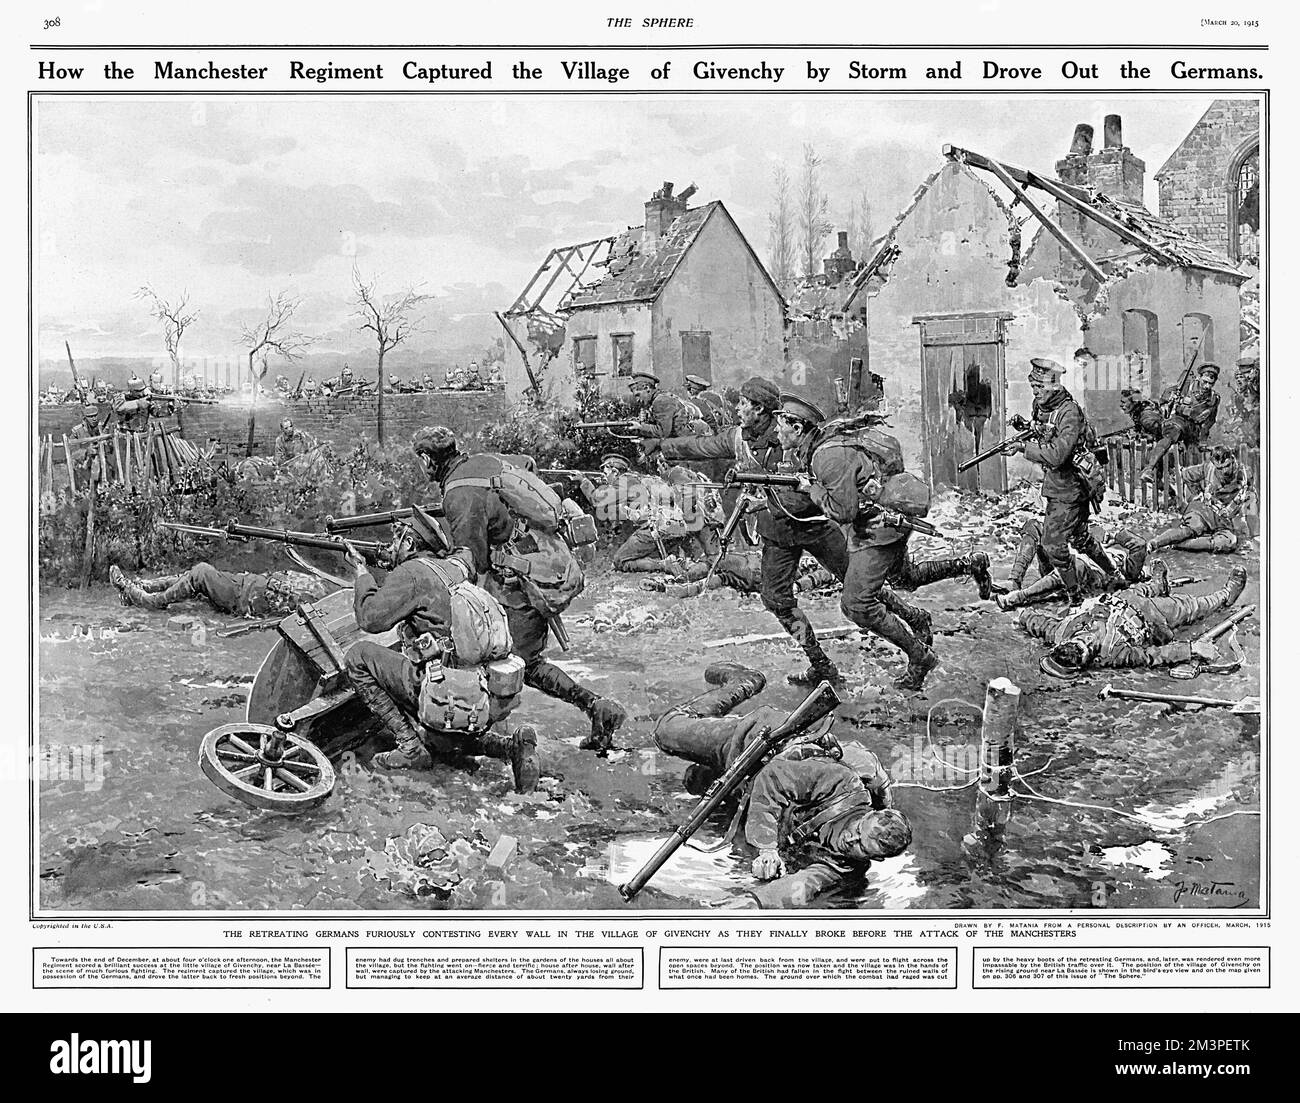 The Manchester Regiment capture the occupied village of Givenchy on 20th December 1914. The area had been the scene of fighting for several days, as British and Indian forces sought to attack the Germans entrenched around the village in order to relieve the pressure on the French at Arras during the First Battle of Champagne. With a German counter attack having succeeded in taking part of the village, the Manchesters were part of a reserve force introduced to the fighting to re-occupy Givenchy. The opposing lines were back to how they had started by 22 December, for the loss of thousands of li Stock Photo